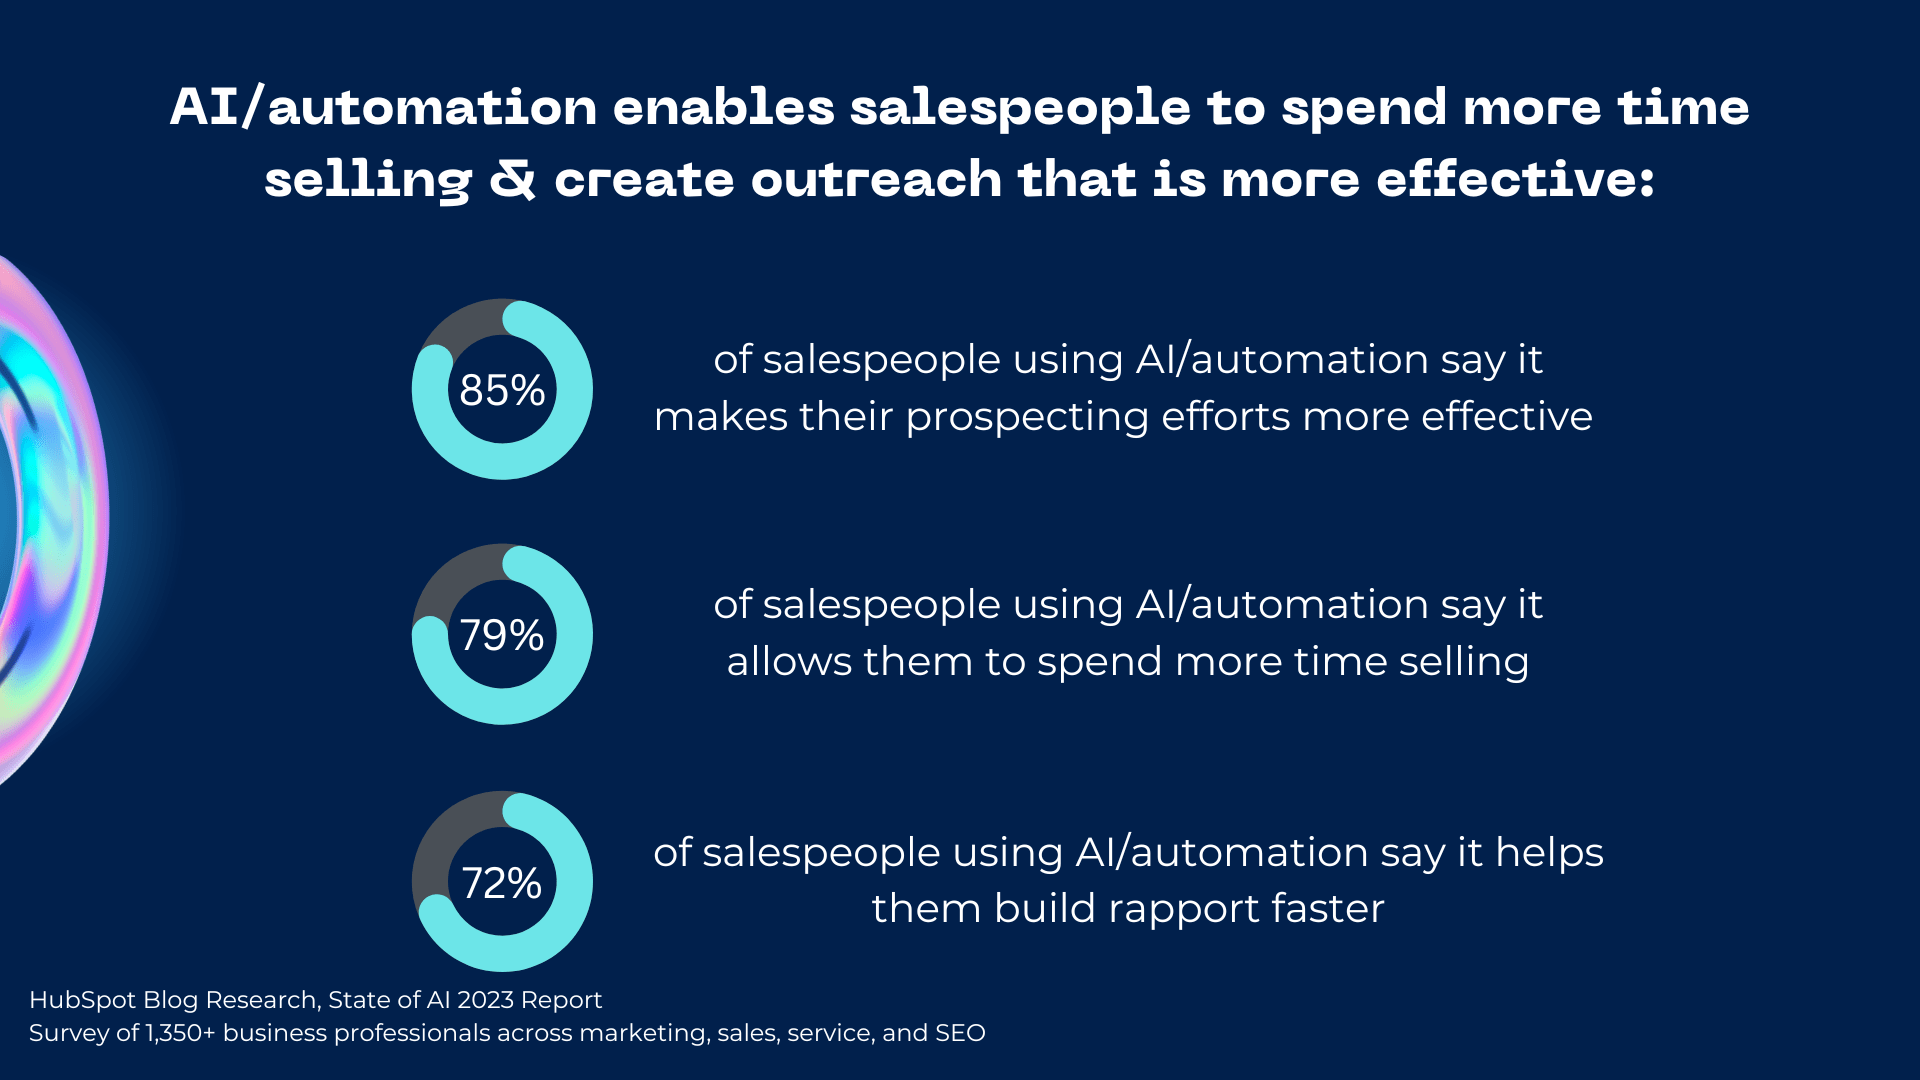 ai helps salespeople send more effective outreach